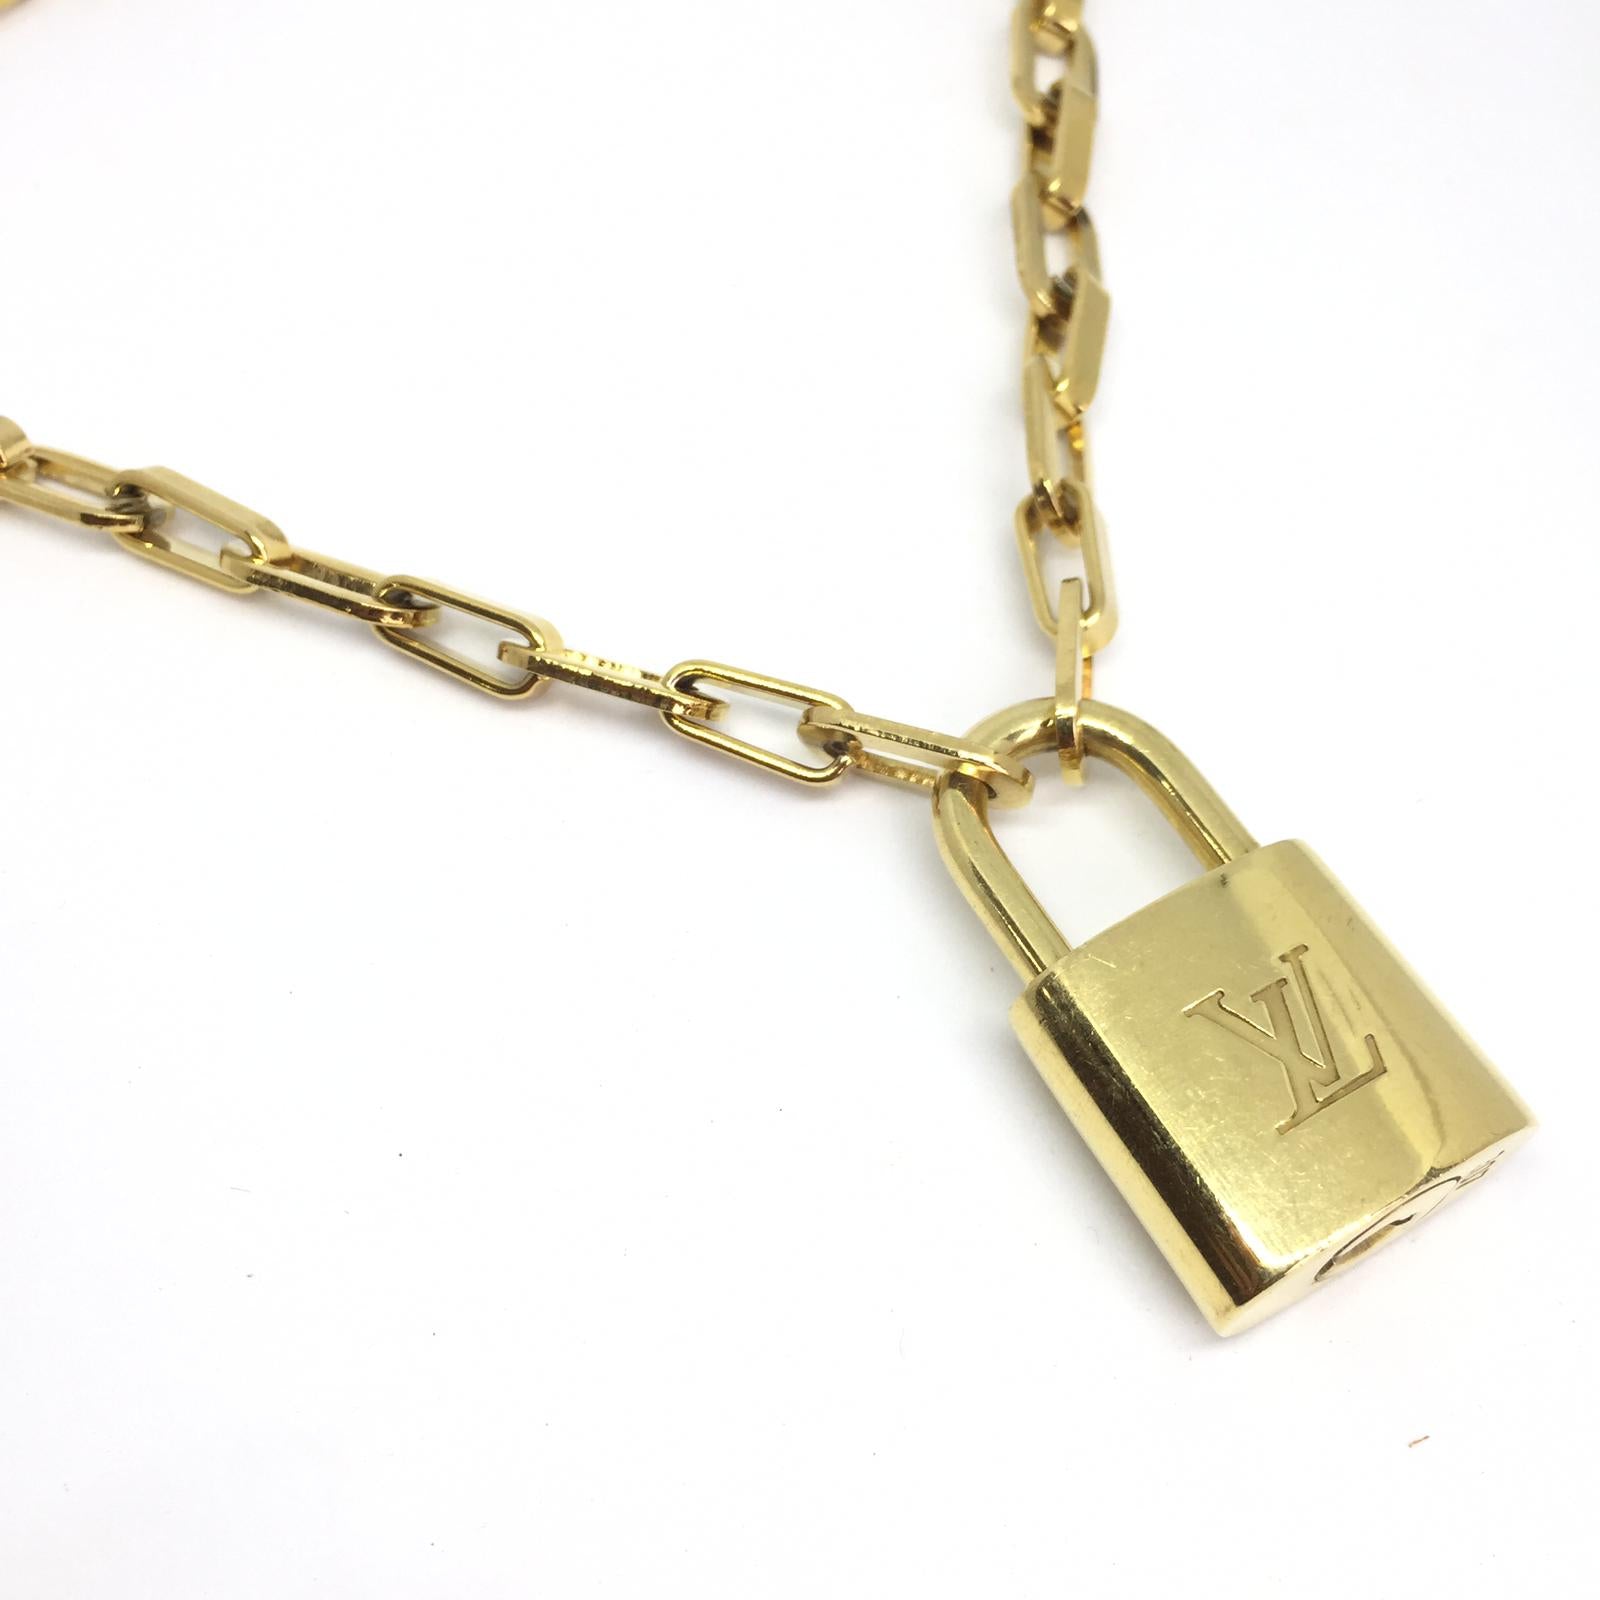 Louis Vuitton Luggage Lock Necklace-Cable Link Chain